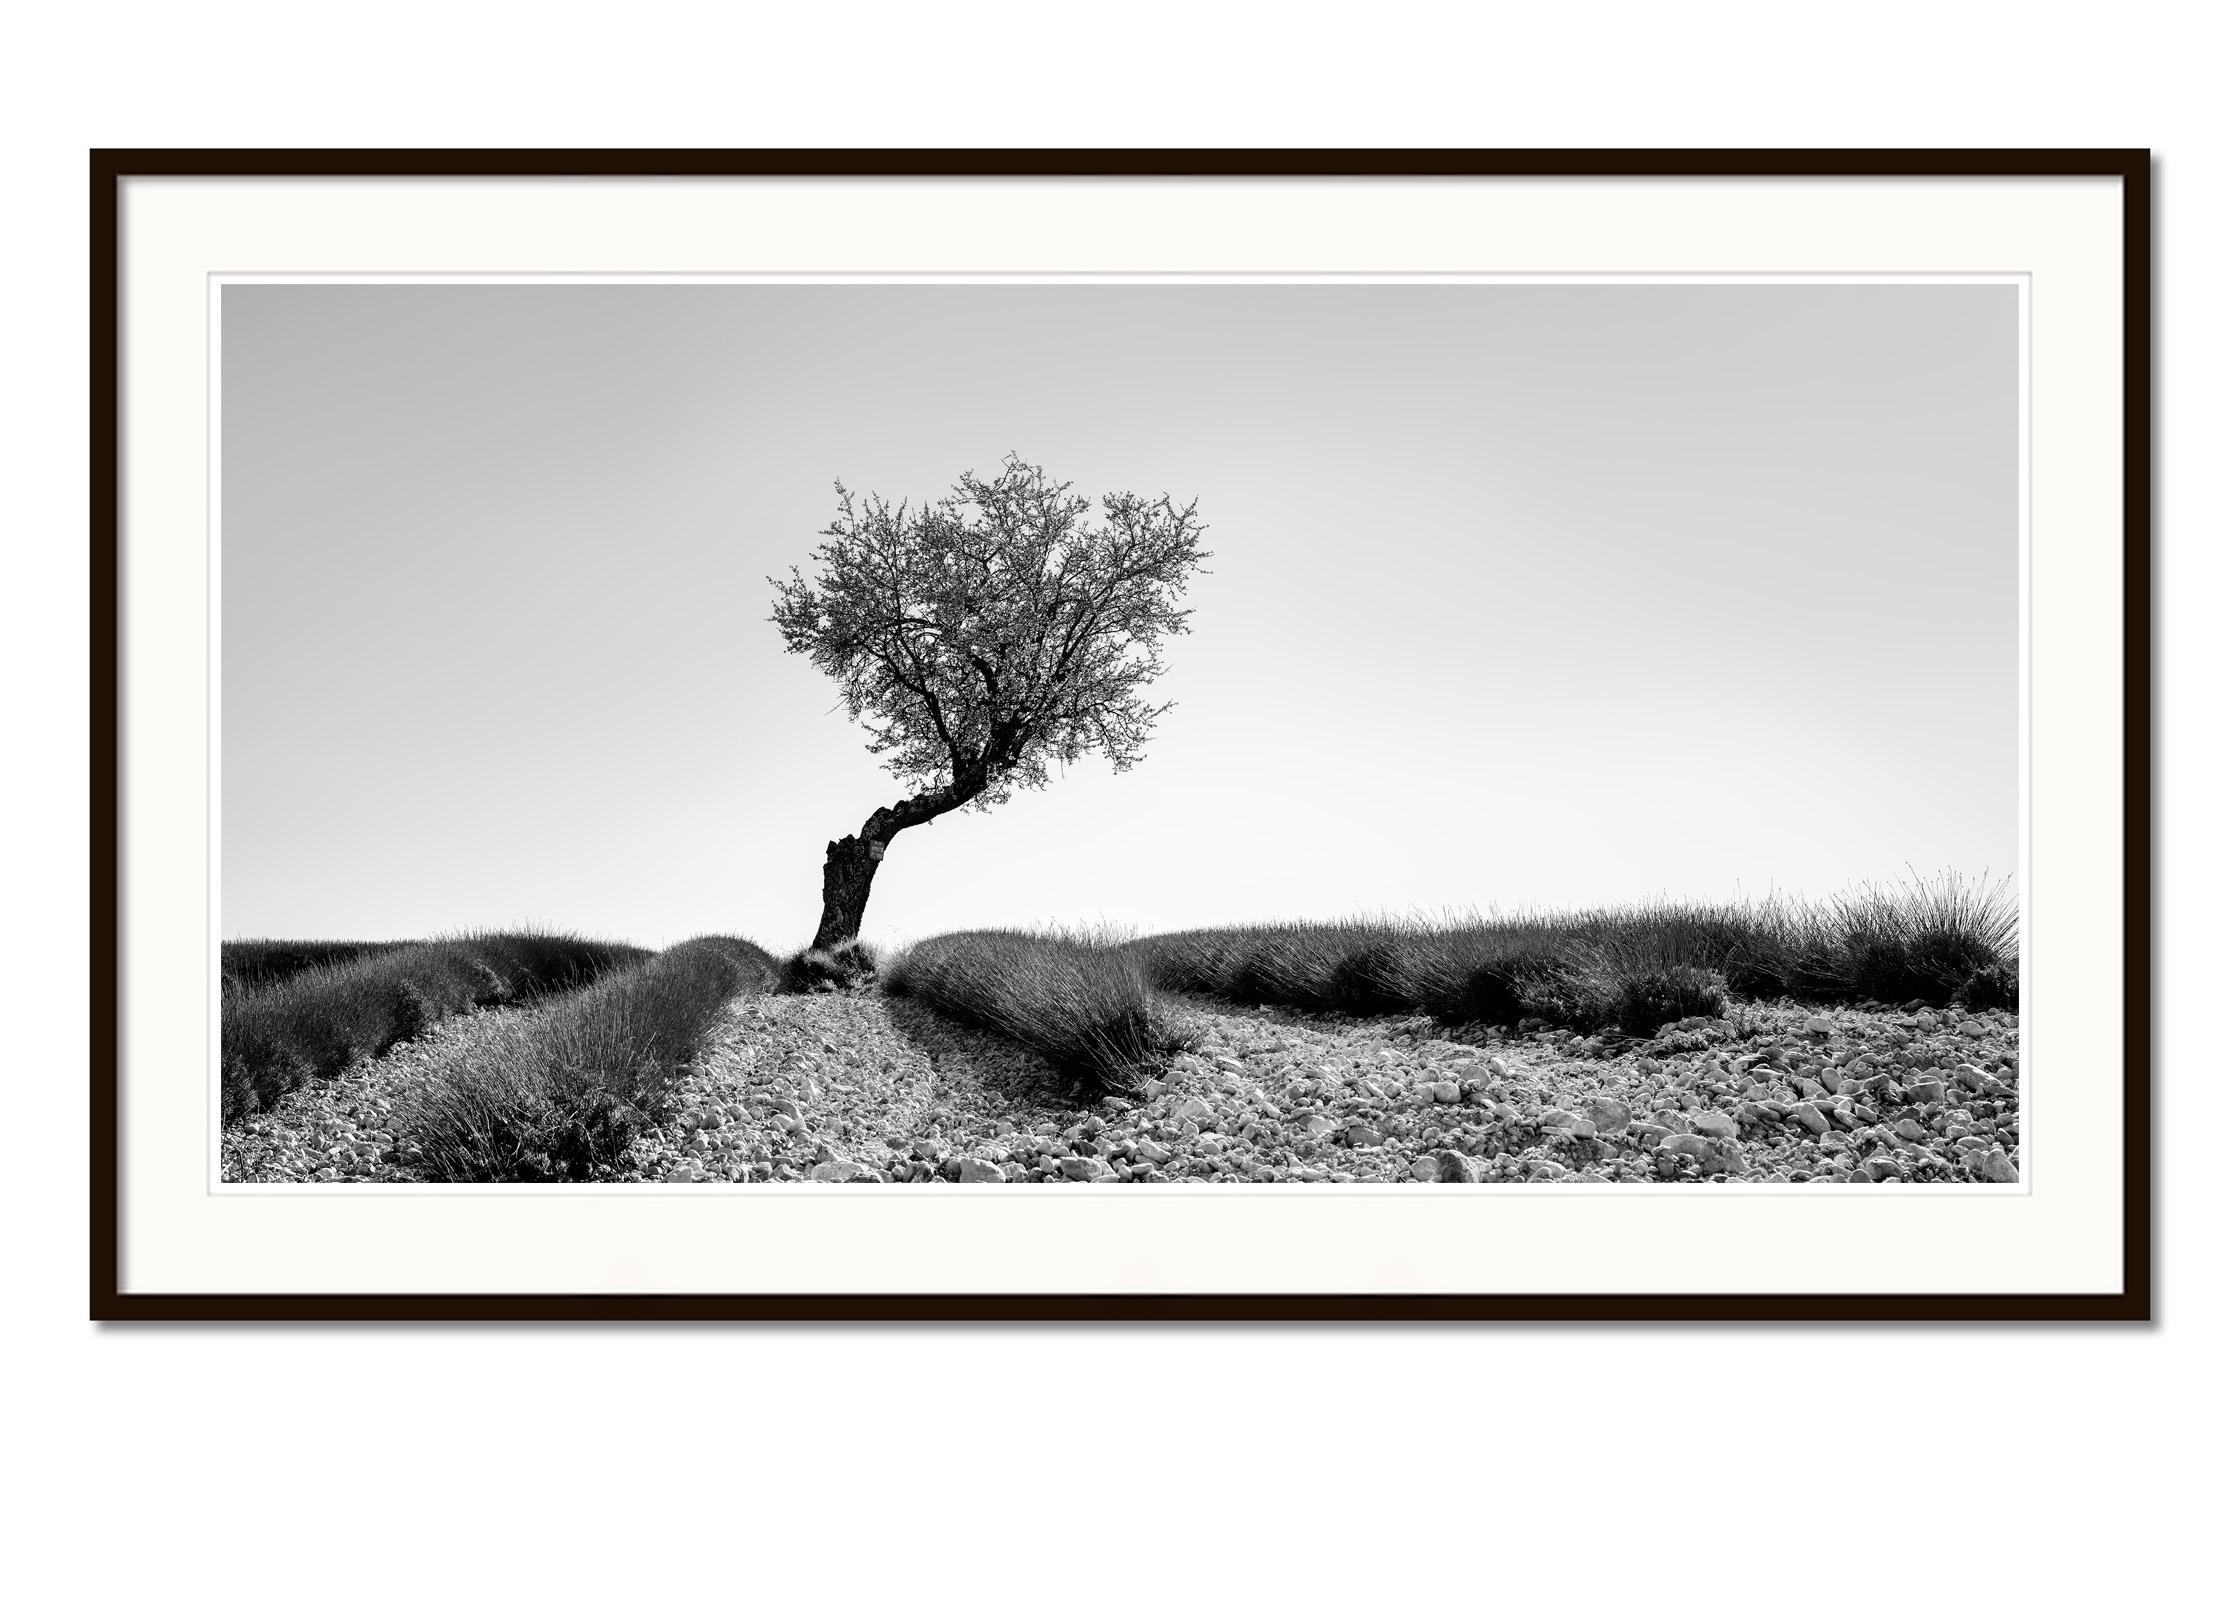 Black and white fine art panorama landscape photography. Single tree in stony lavender field in Provence, France. Archival pigment ink print, edition of 8. Signed, titled, dated and numbered by artist. Certificate of authenticity included. Printed